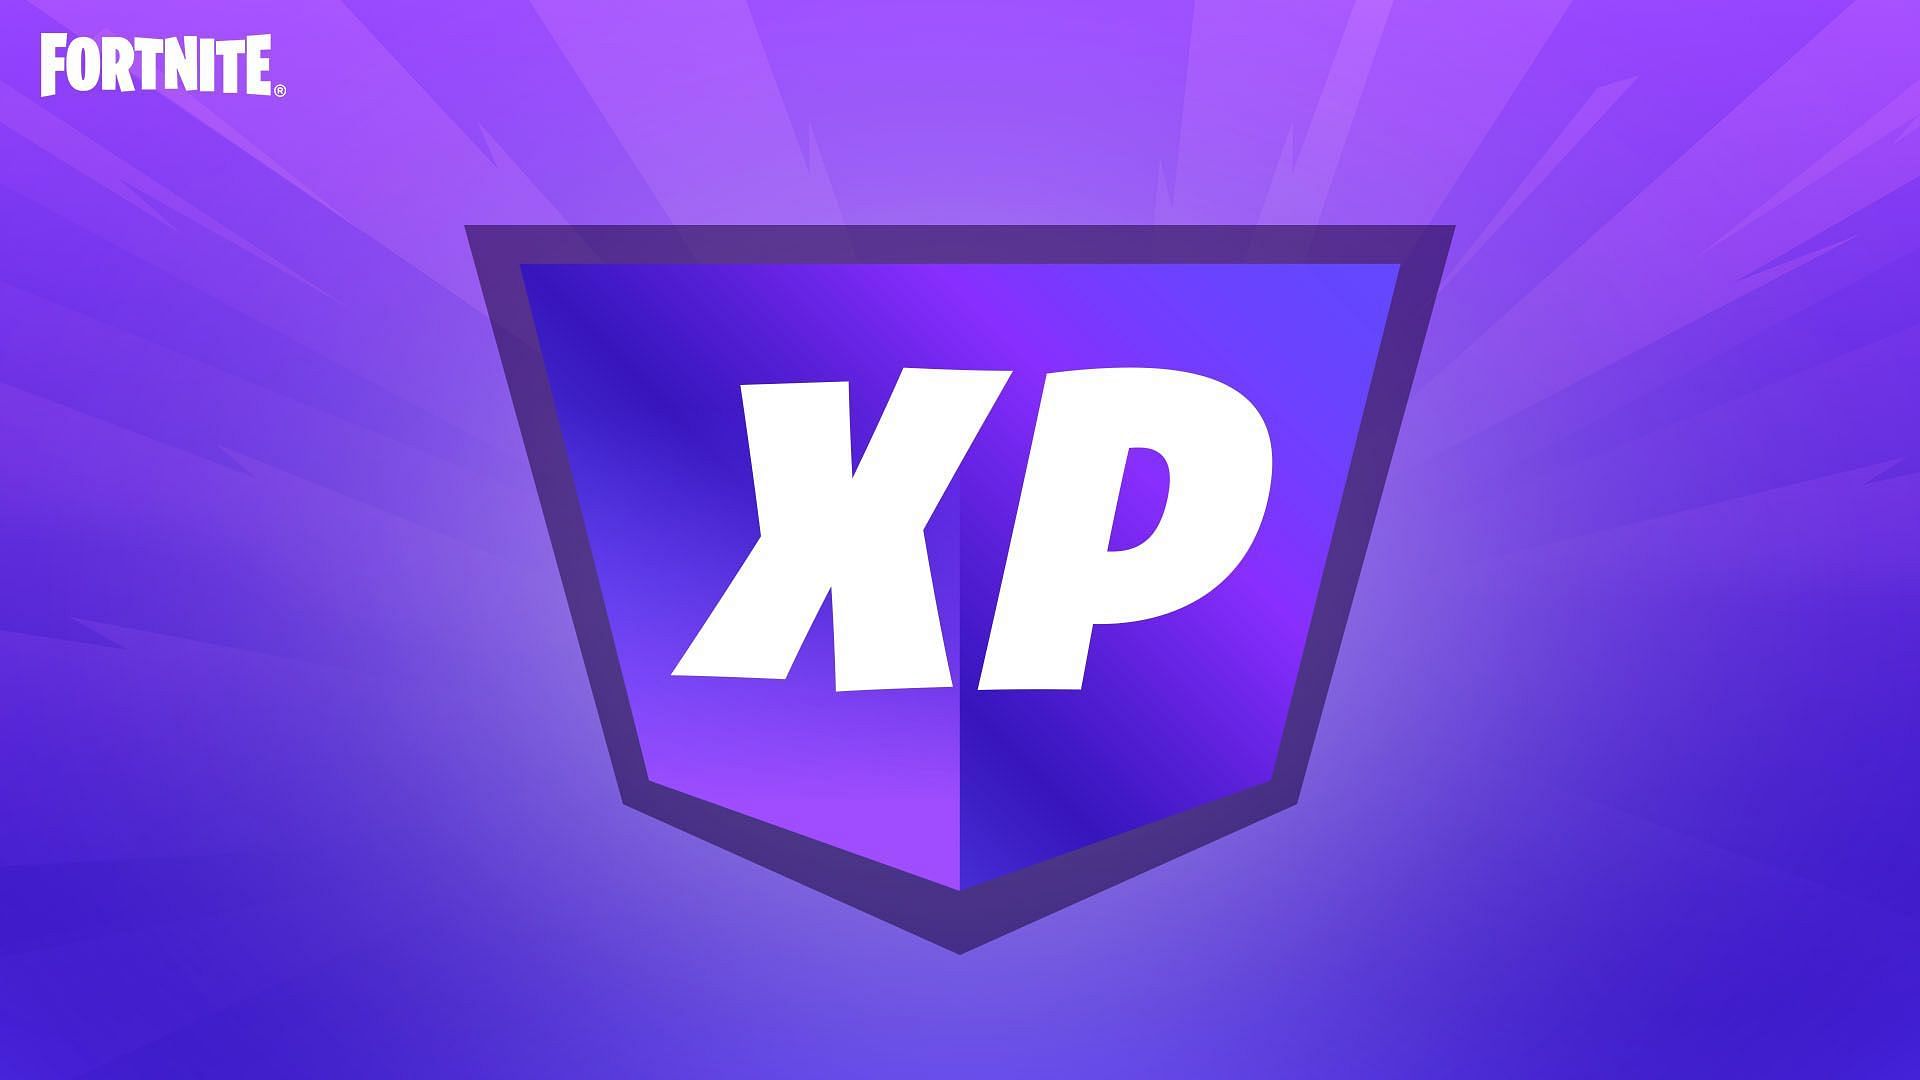 Supercharged XP to the rescue in Fortnite Chapter 3 Season 3 (Image via Epic Games/Fortnite)